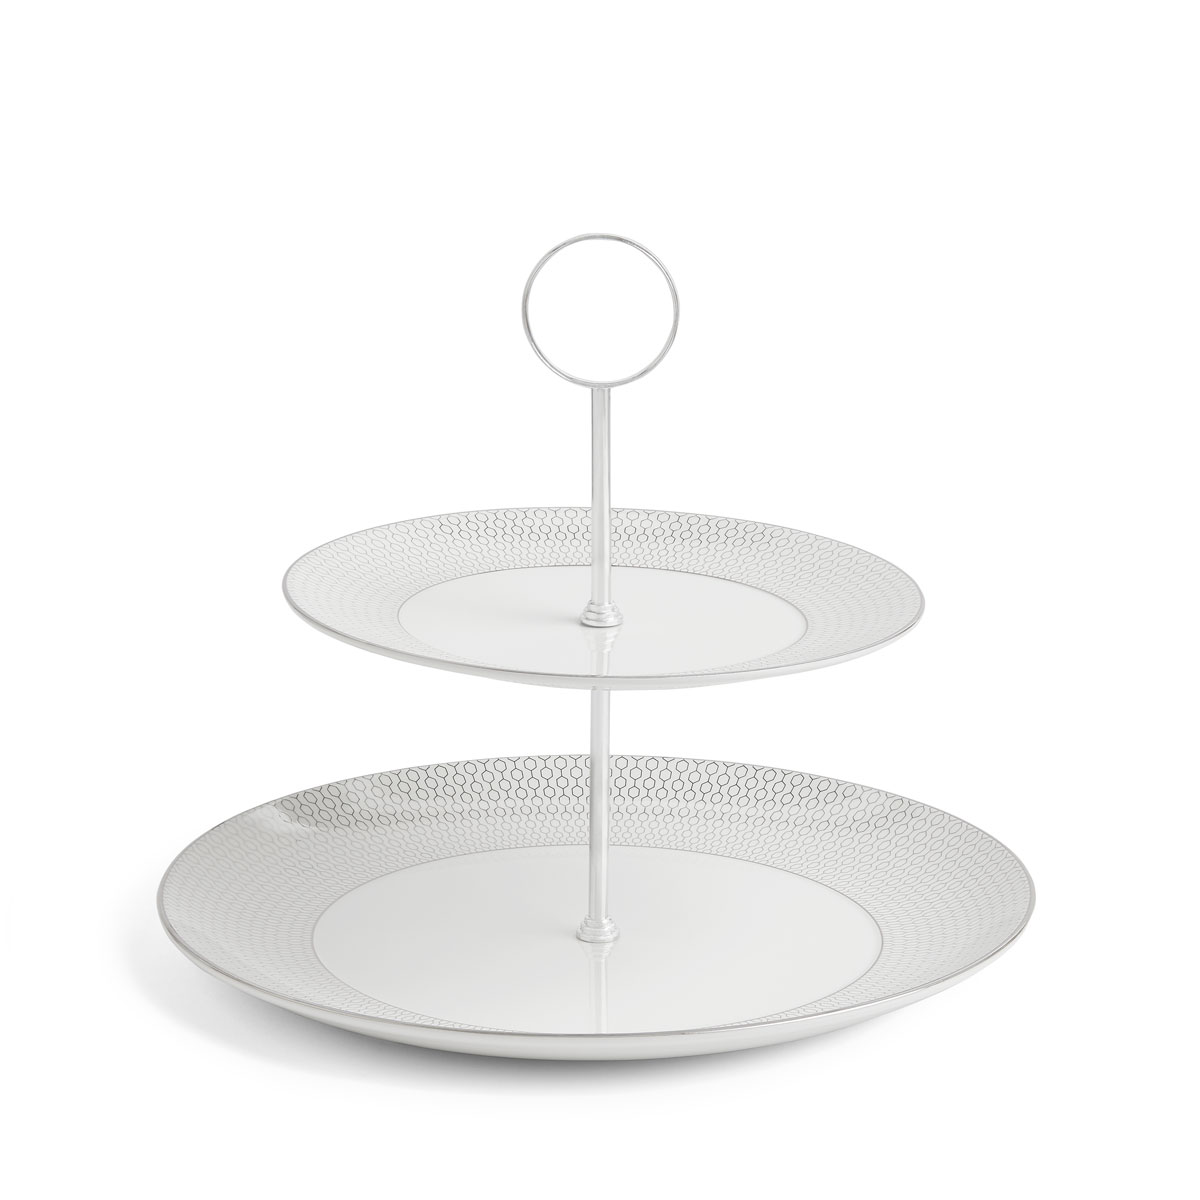 Wedgwood Gio Platinum Cake Stand Two Tier